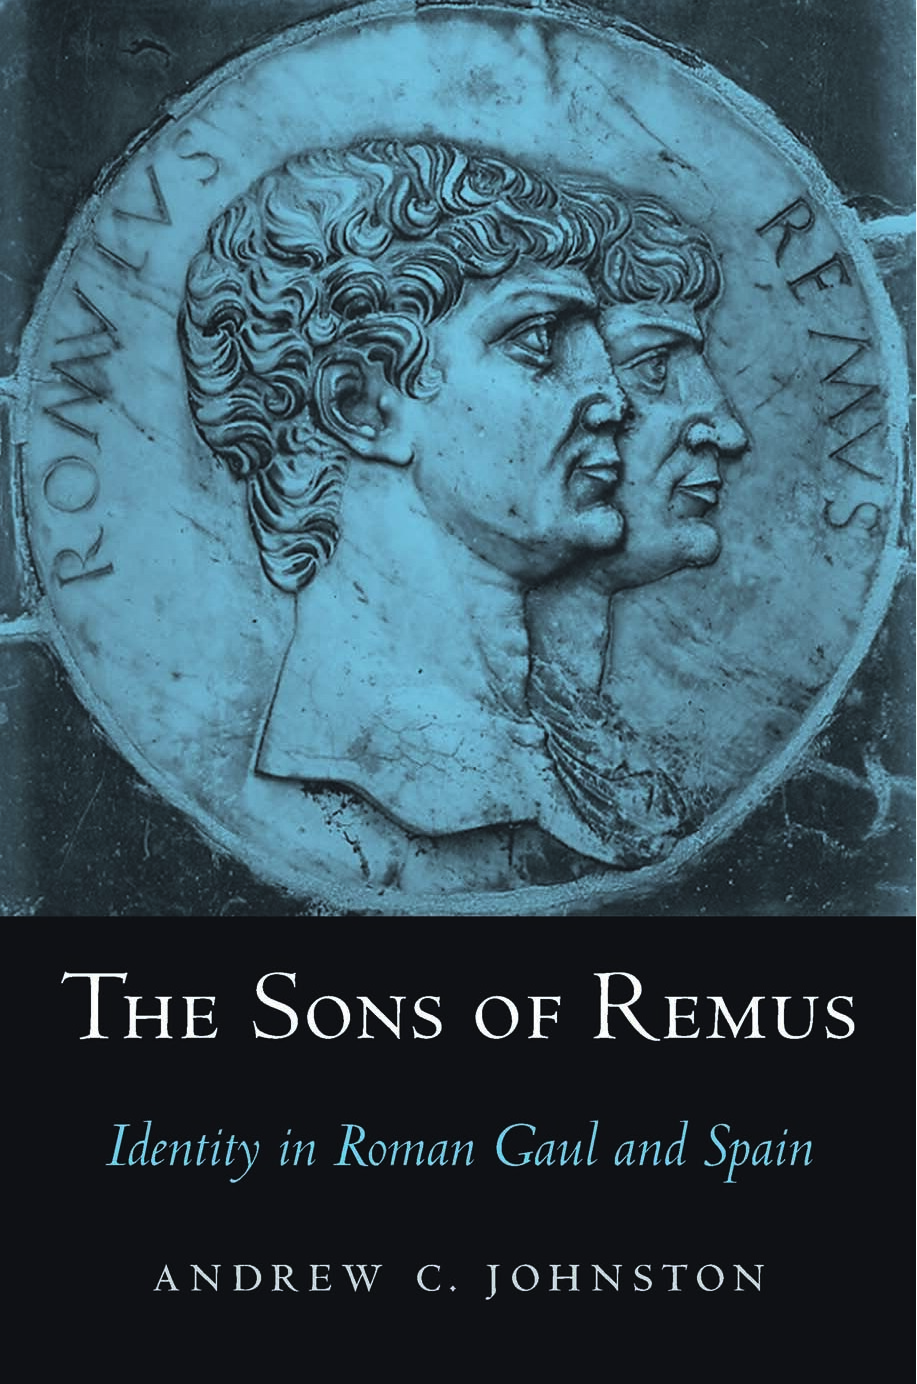 The Sons of Remus: Identity in Roman Gaul and Spain